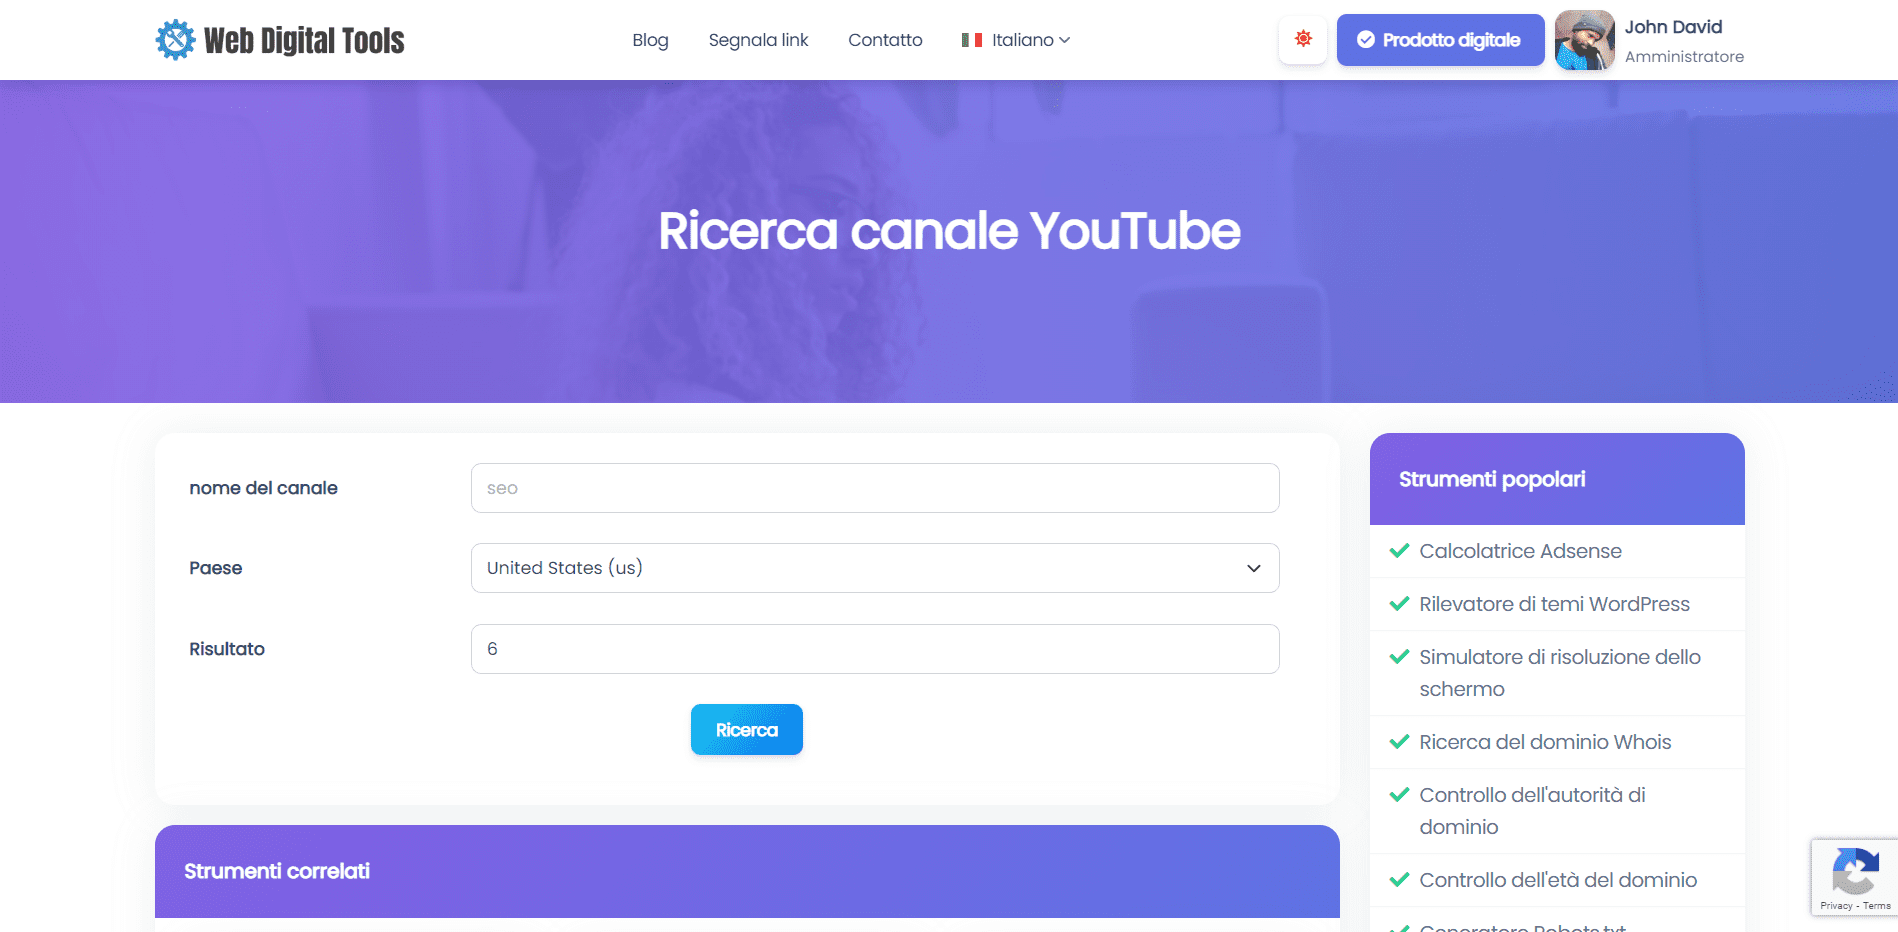 Ricerca canale YouTube